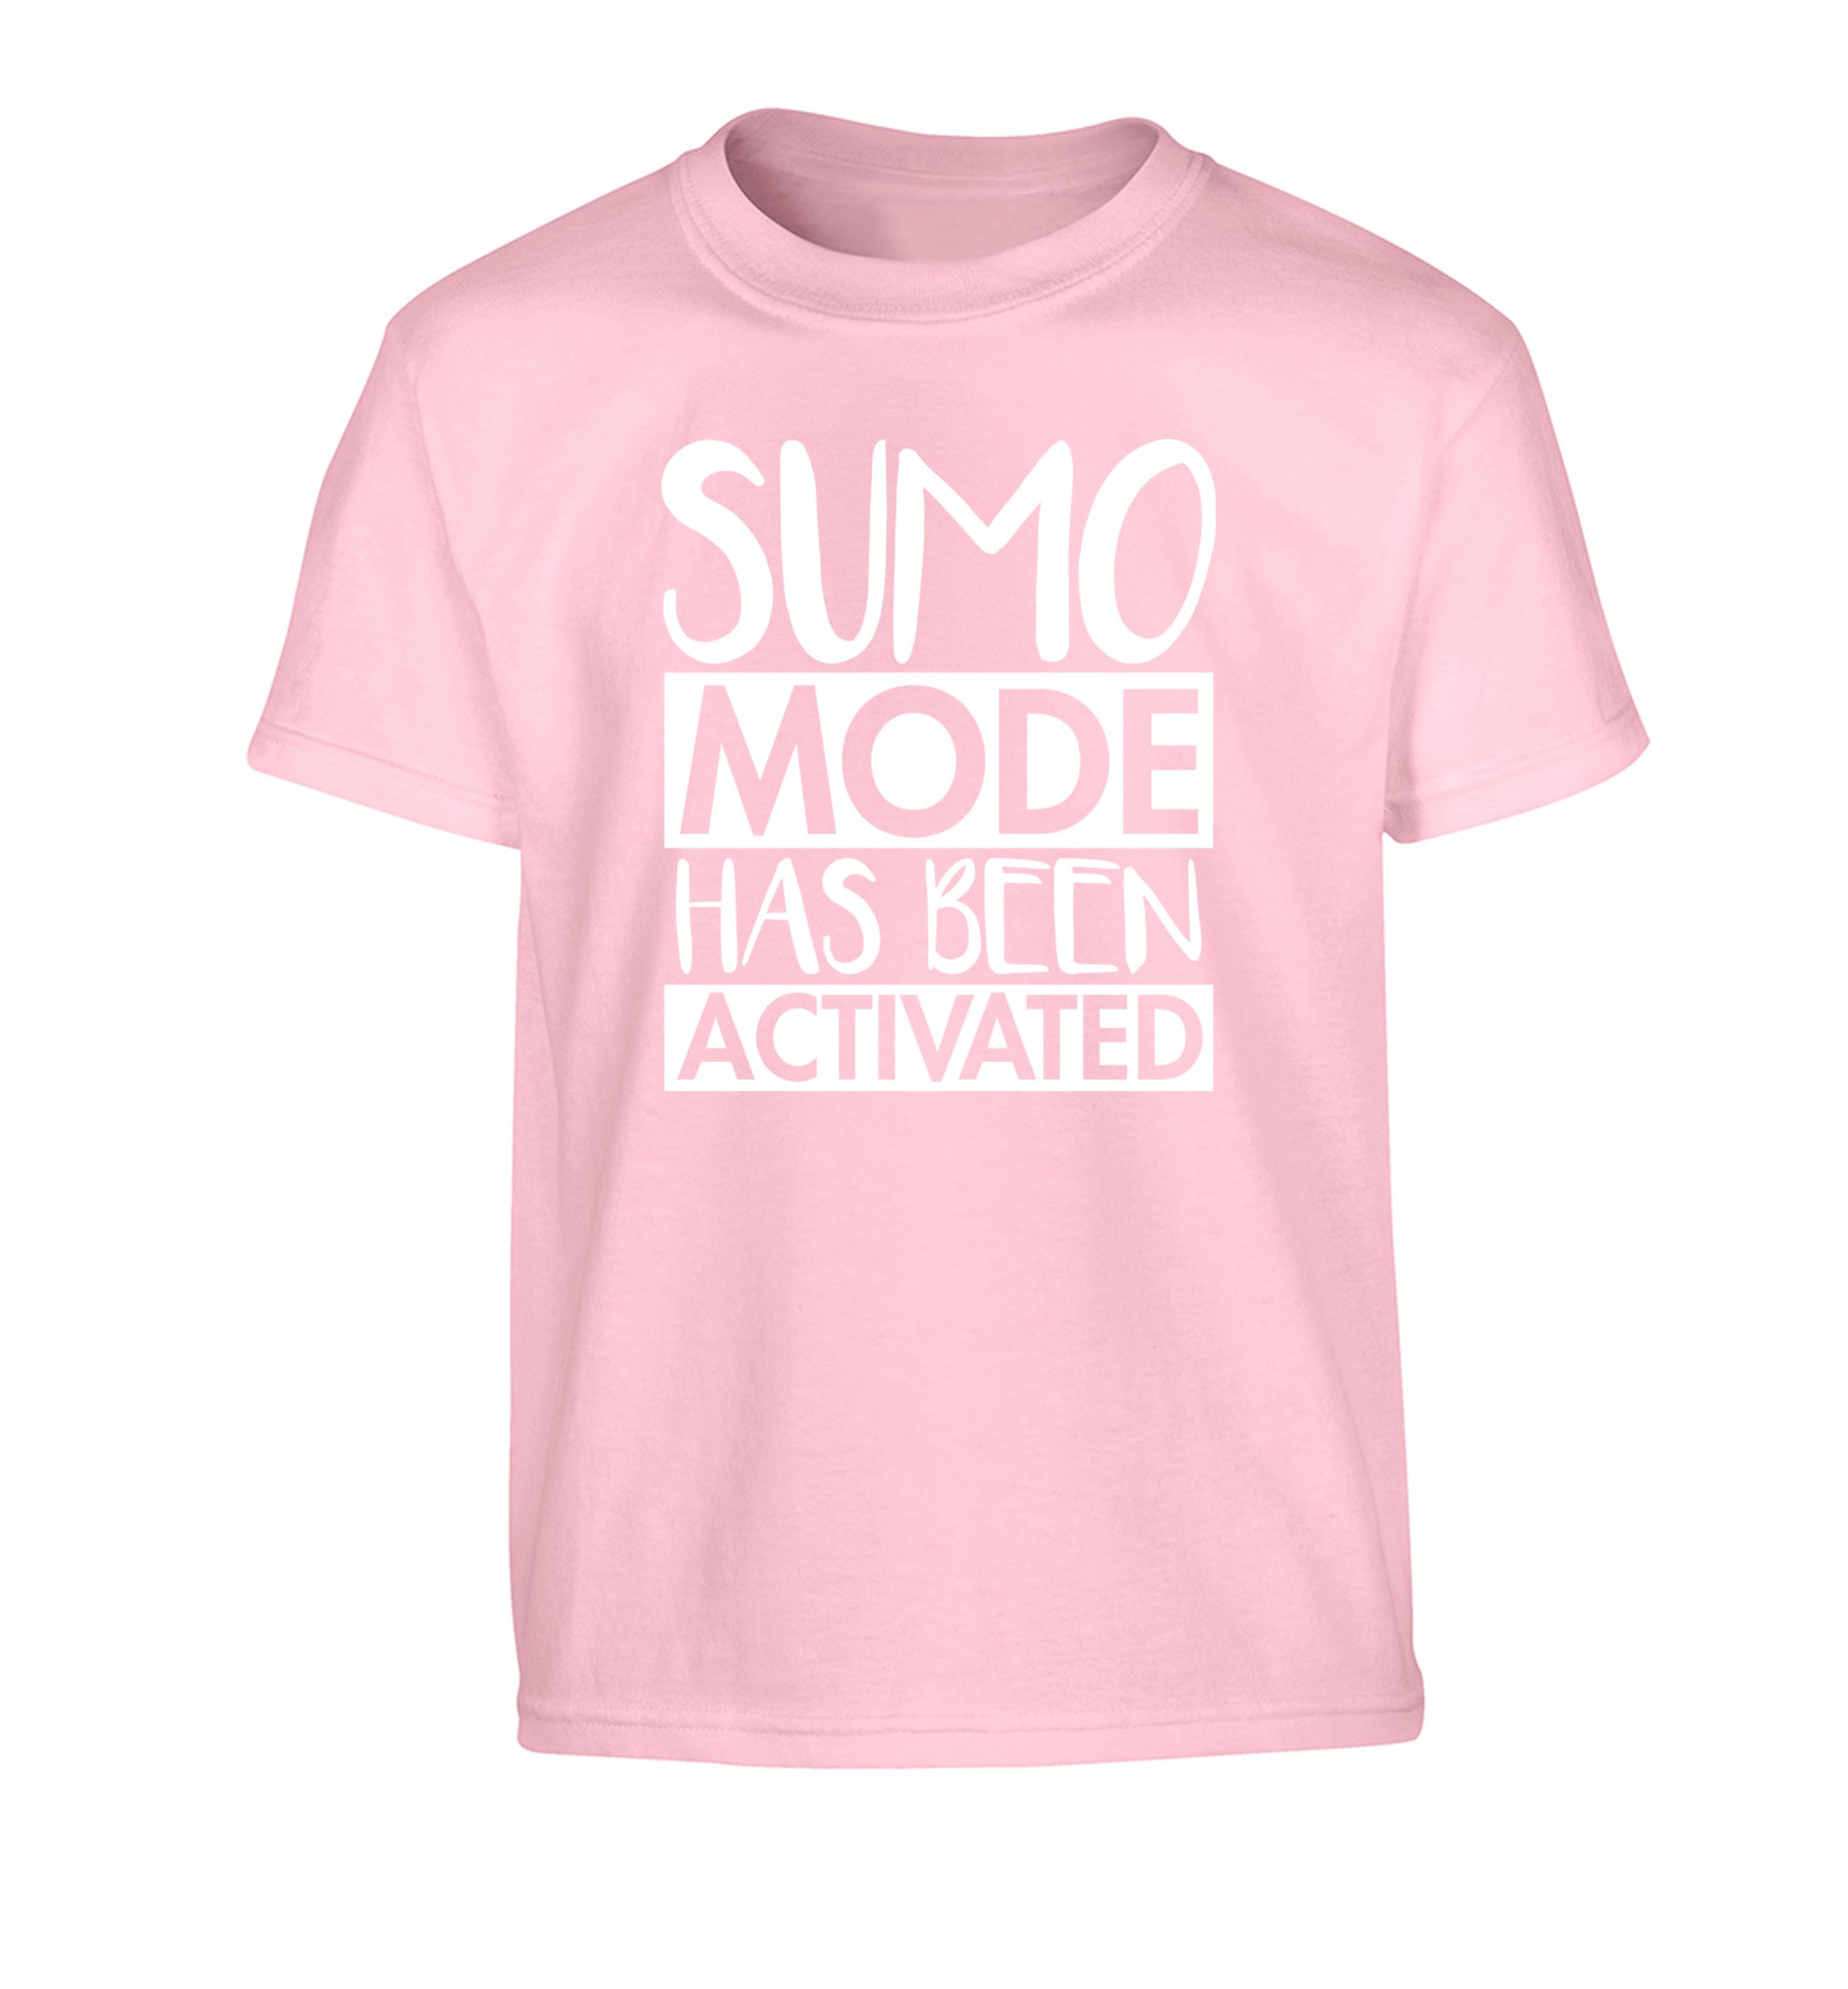 Sumo mode activated Children's light pink Tshirt 12-14 Years